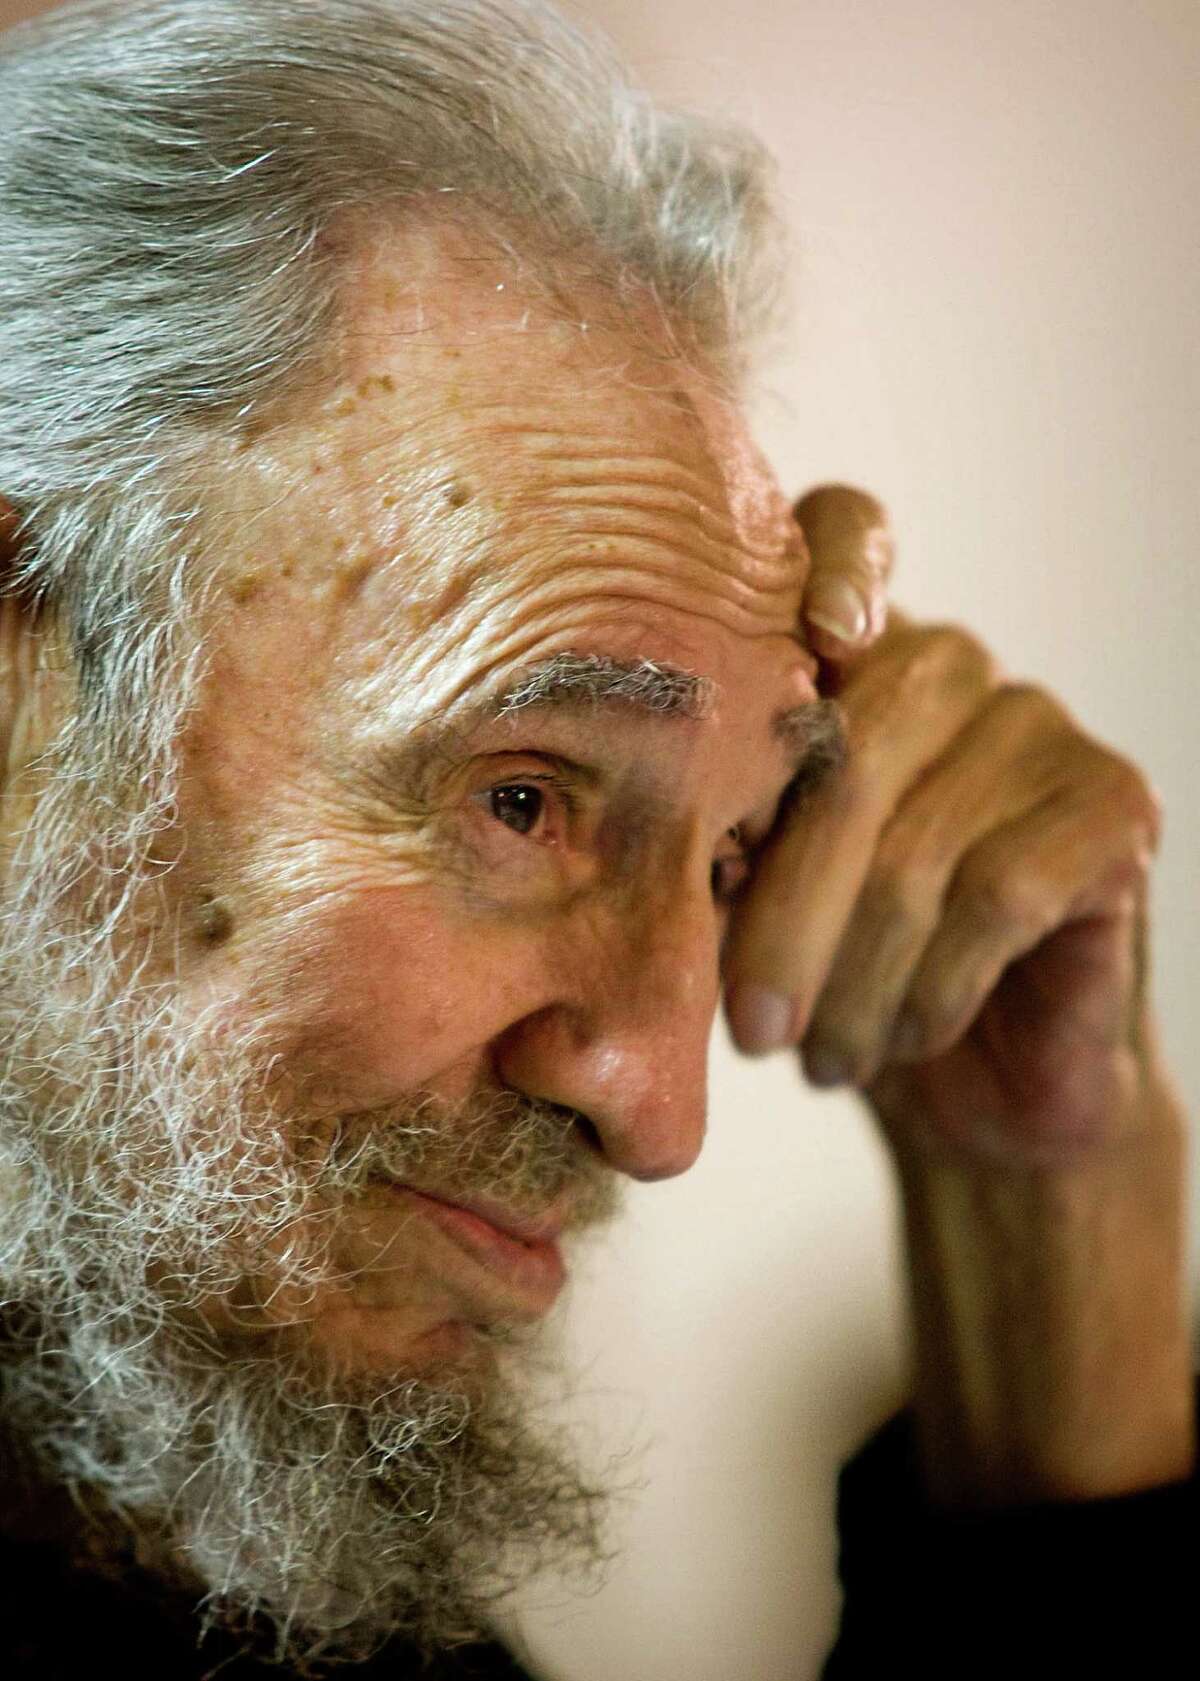 Despite a claim that he's had a stroke, the official word on 86-year-old Fidel Castro is that he is well.